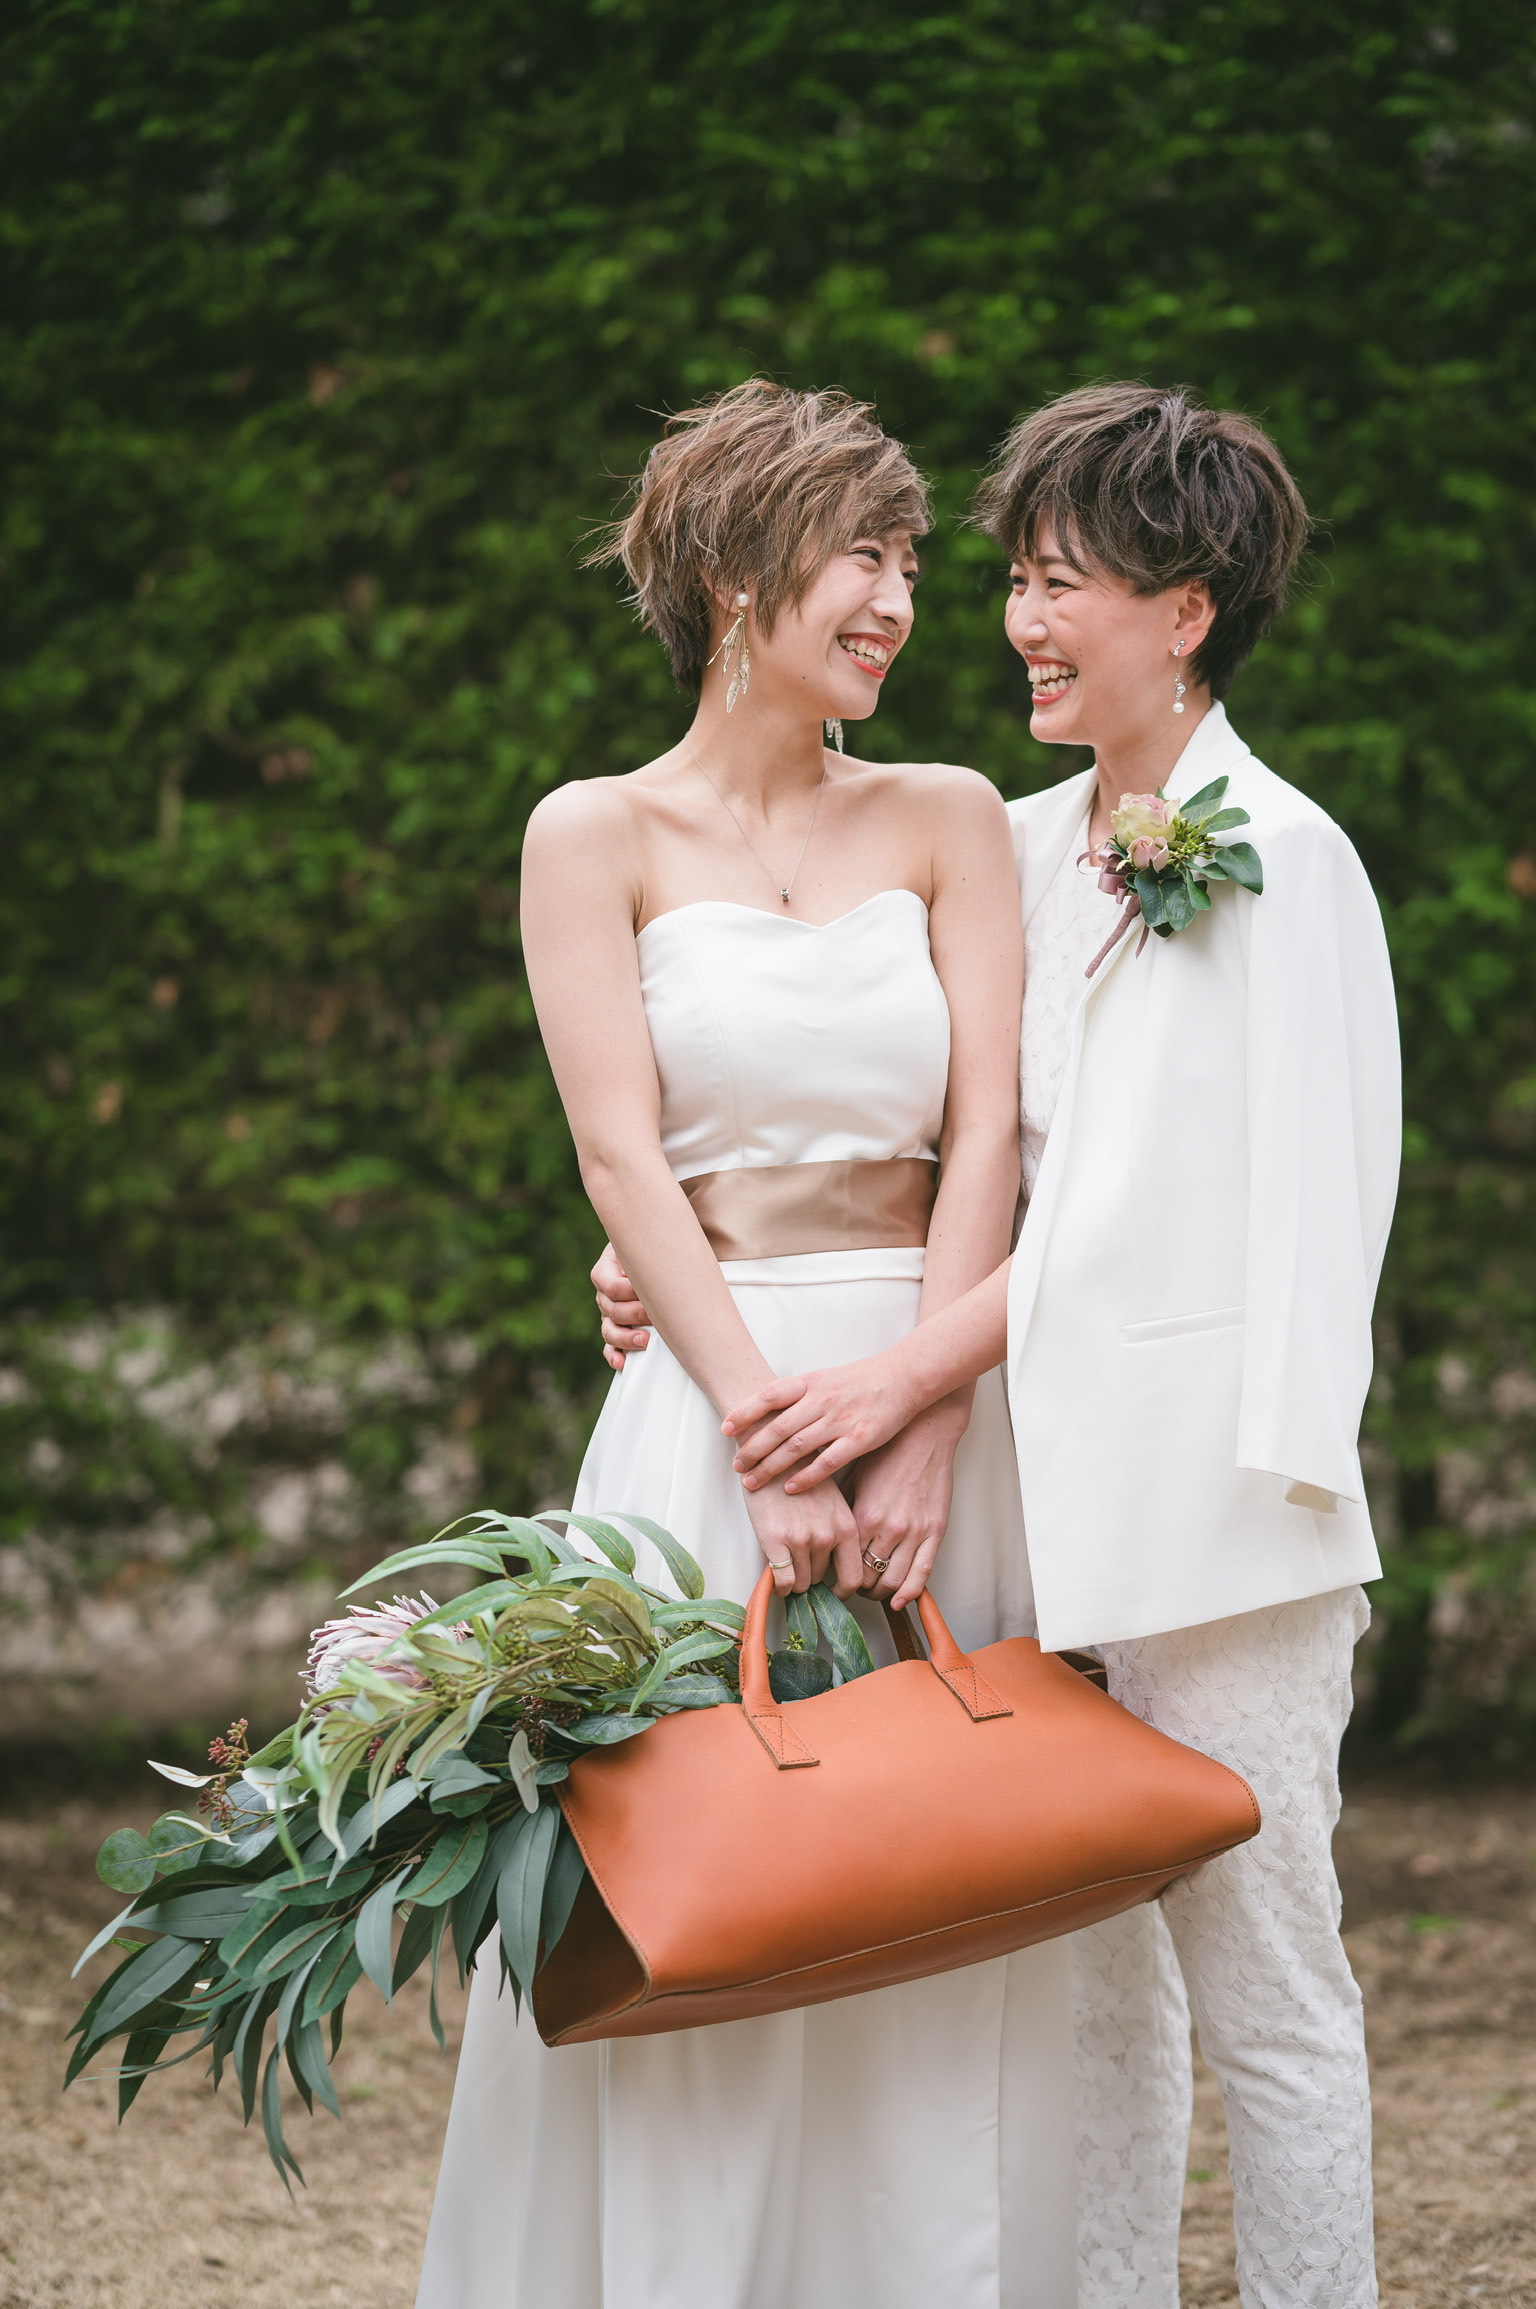 Despite getting their partnership certificate last July, Yumi Nagaya and her partner are still not afforded many of the rights heterosexual married couples are given. Photo: Courtesy of Yumi Nagaya 